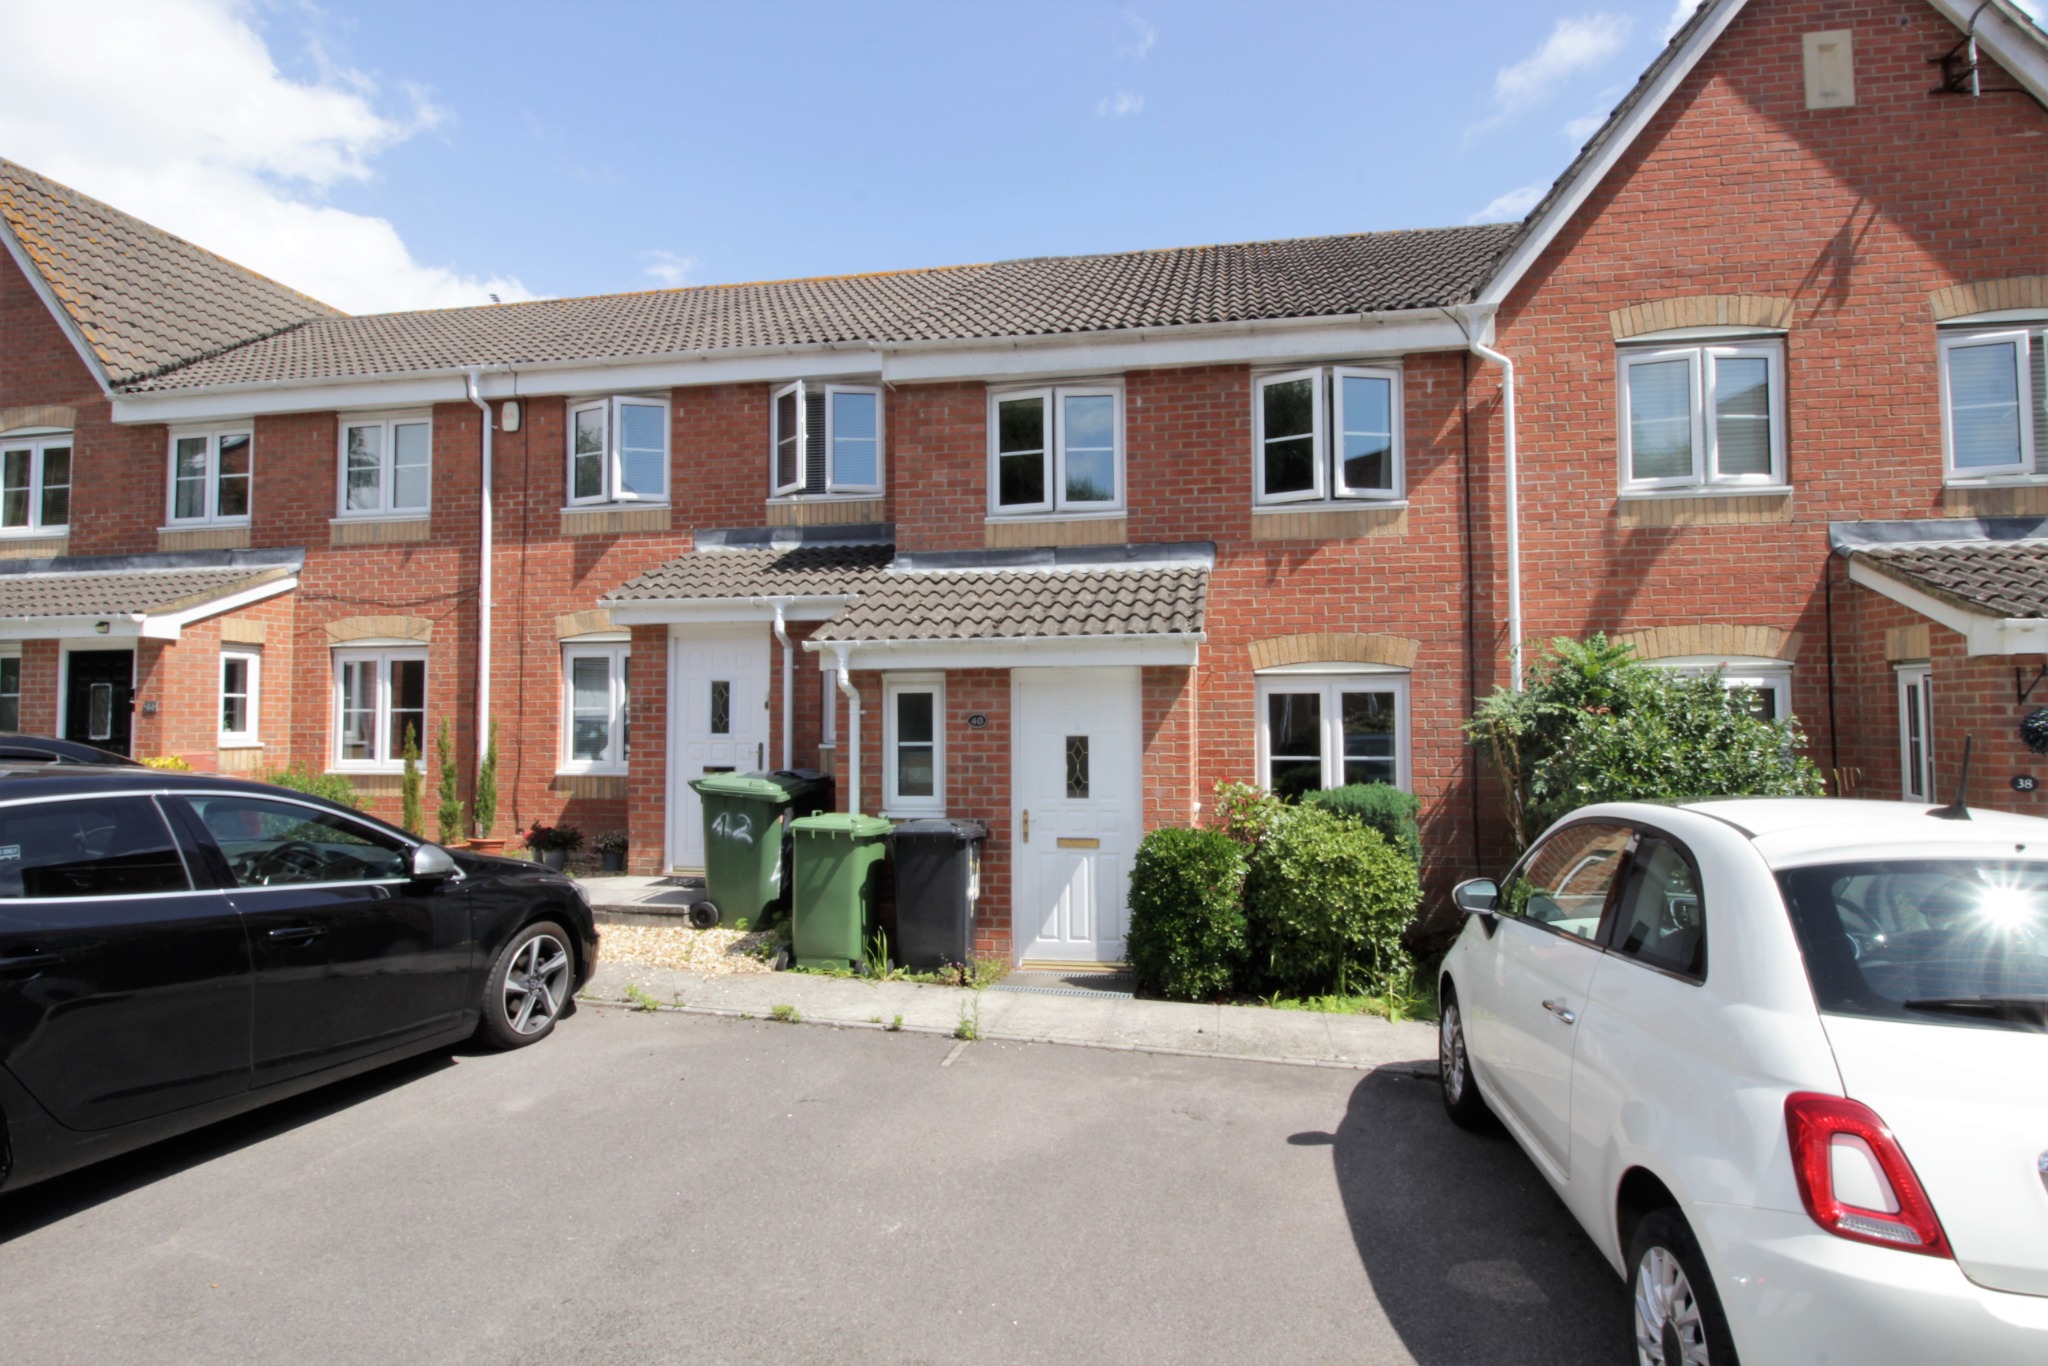 3 bed Mid Terraced House for rent in Waterlooville. From Pearsons Estate Agents - Waterlooville